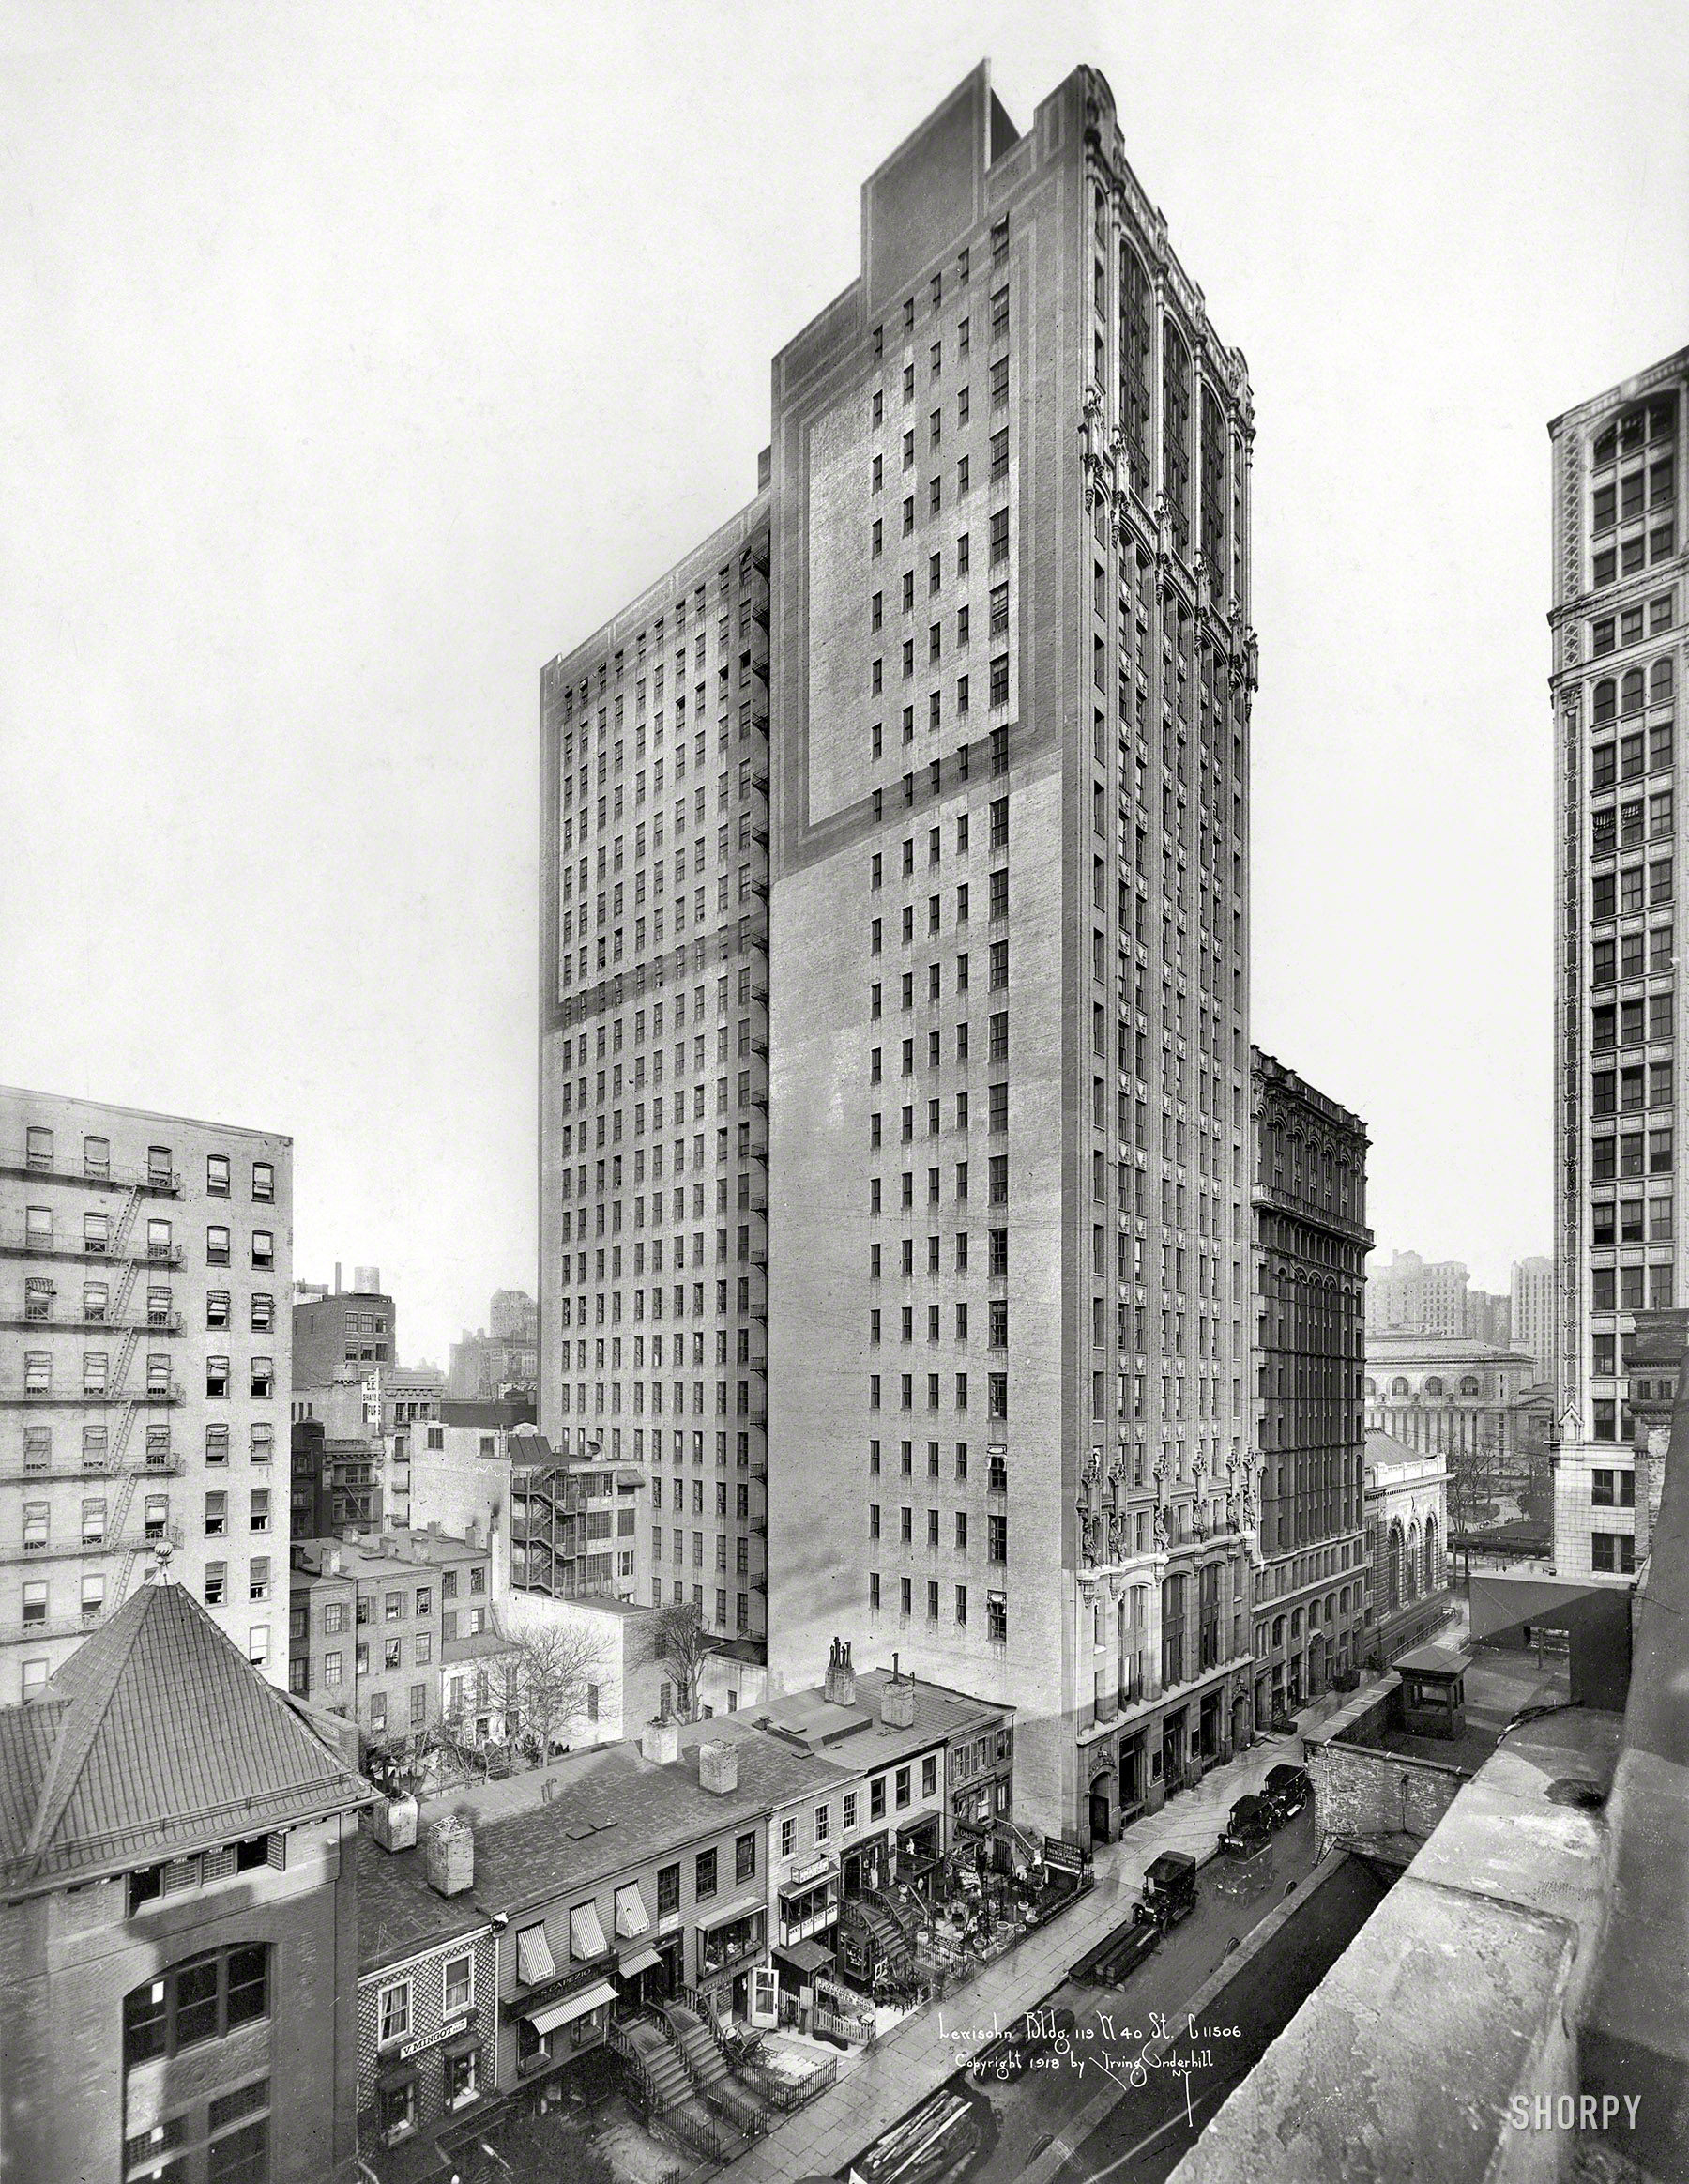 New York, 1918. "Lewisohn Building, 119 W. 40th Street. Maynicke & Franke, architects." Dwarfed by its newer neighbors 101 years after its completion, this 22-story, 325-foot tower still stands. Irving Underhill photo. View full size.